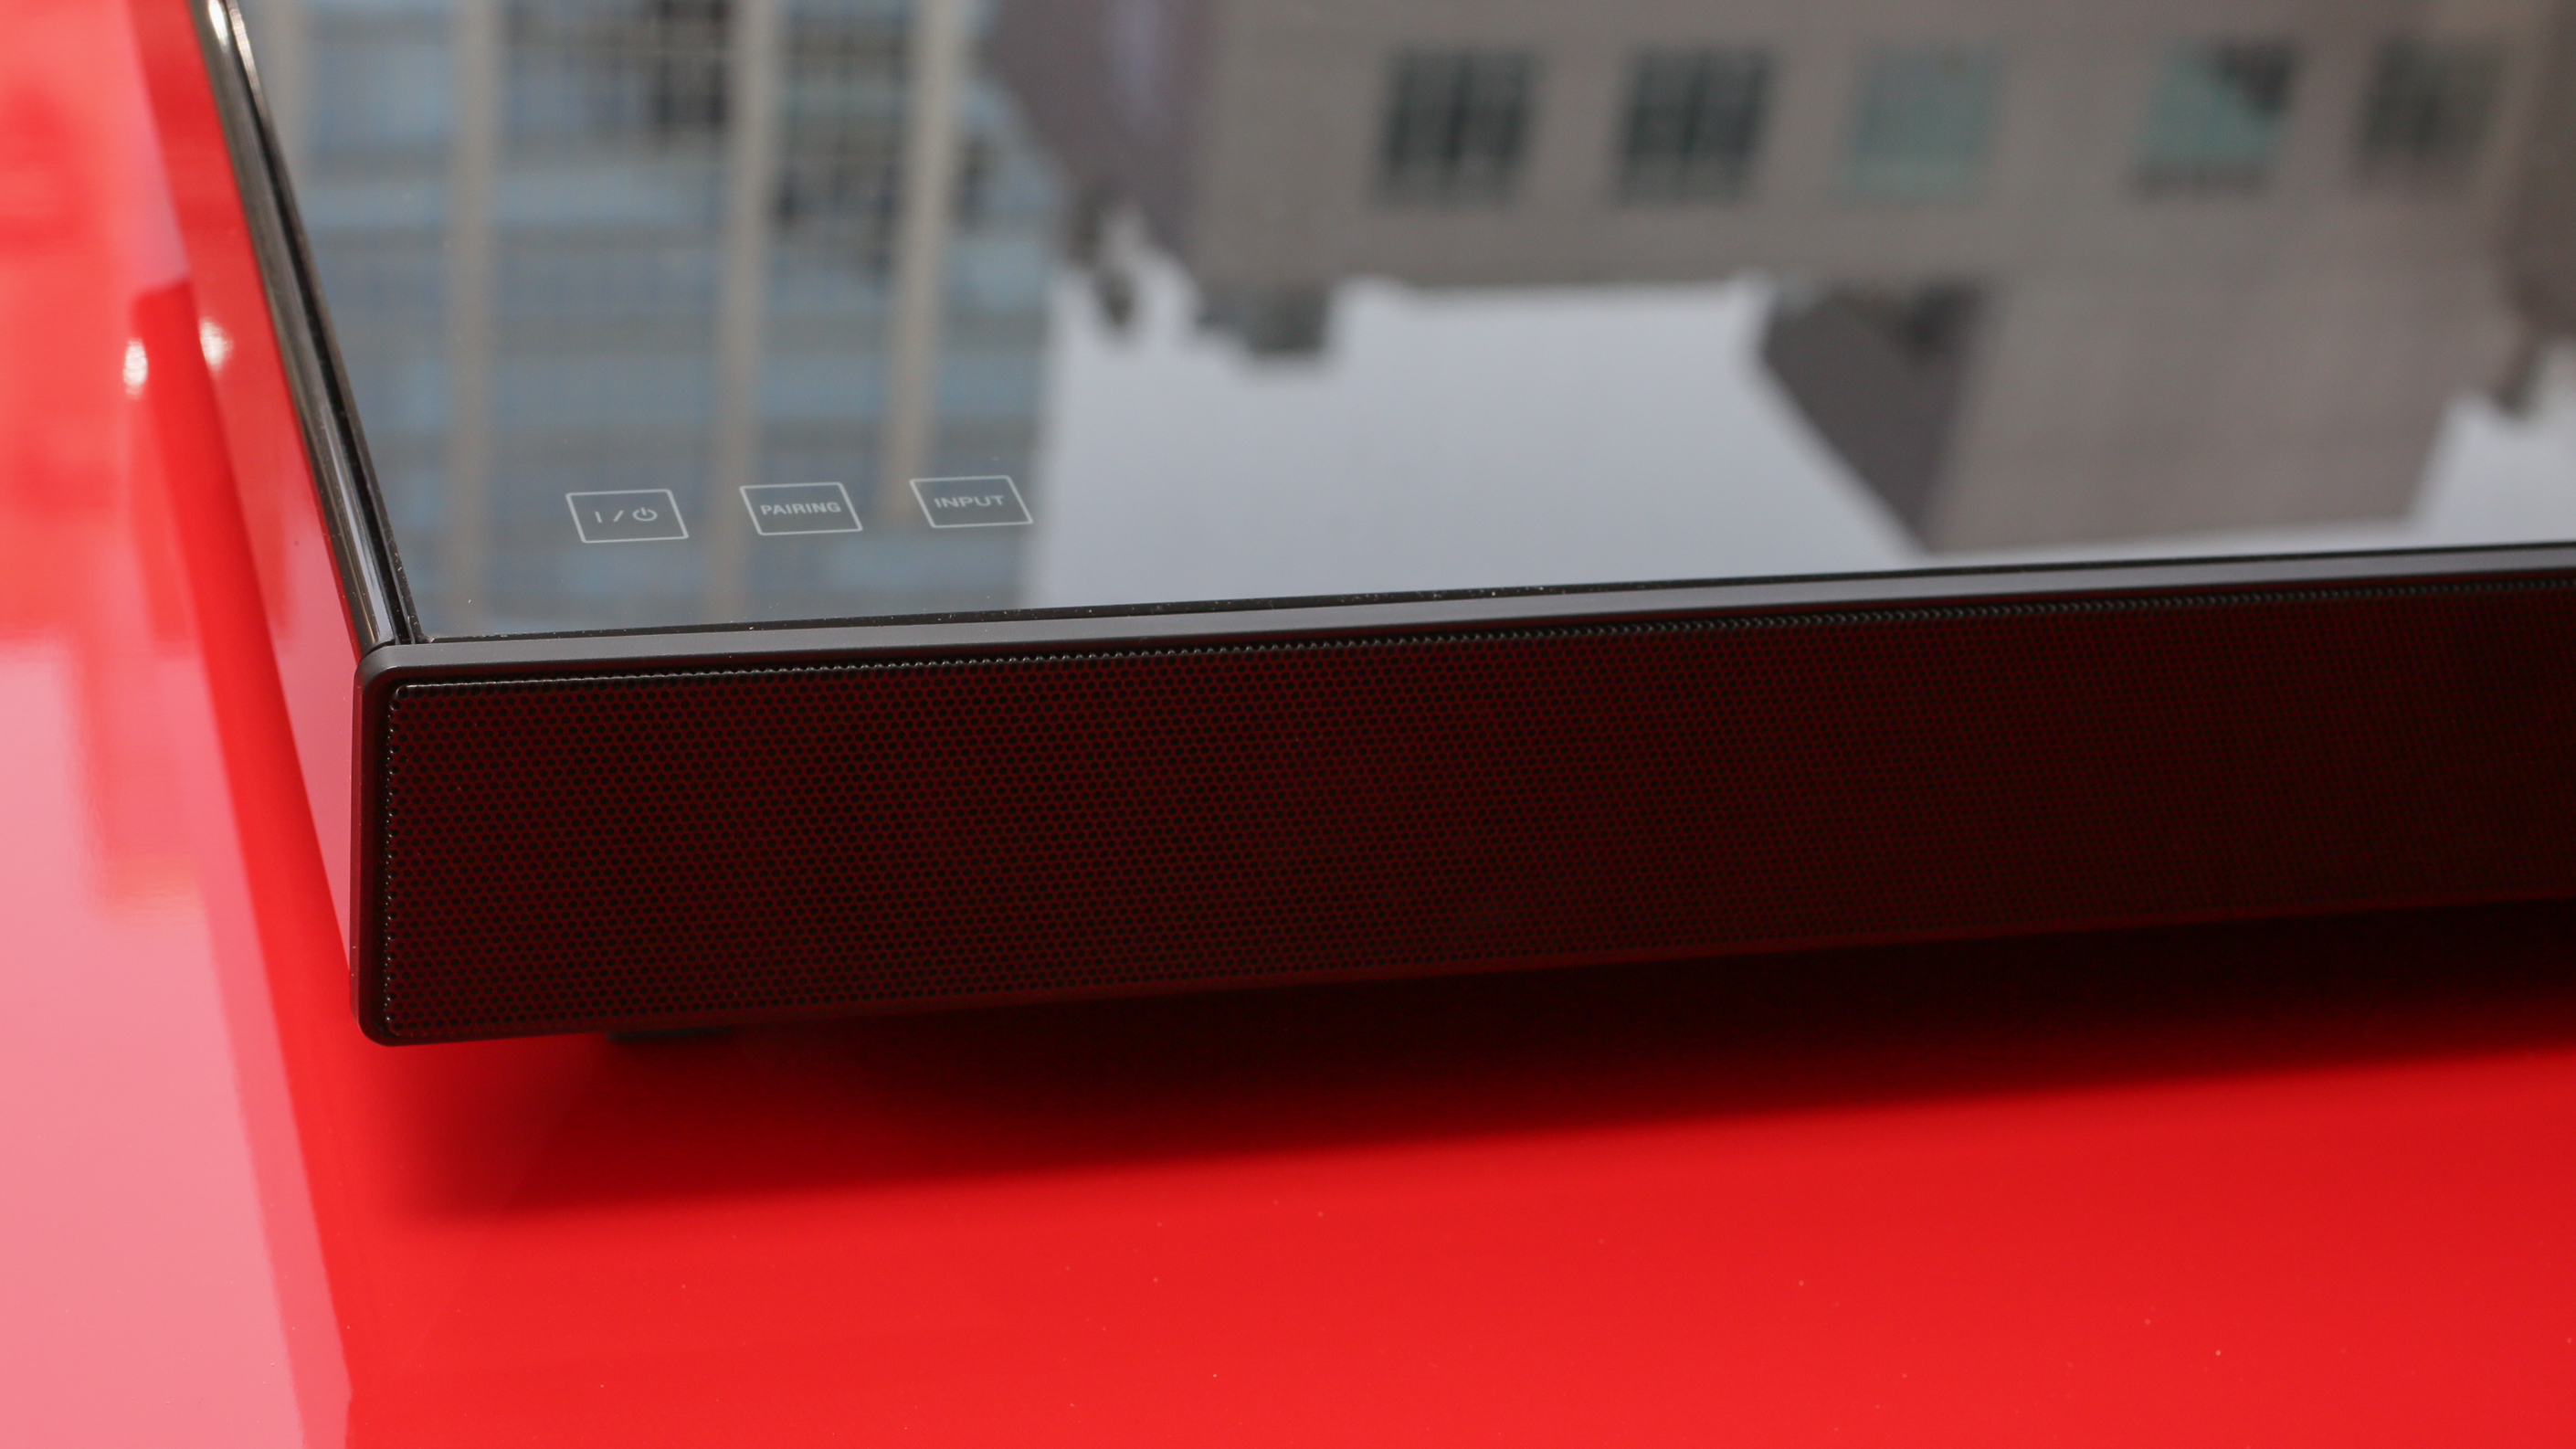 Sony HT-XT1 review: A sleek sound bar for under your TV - CNET